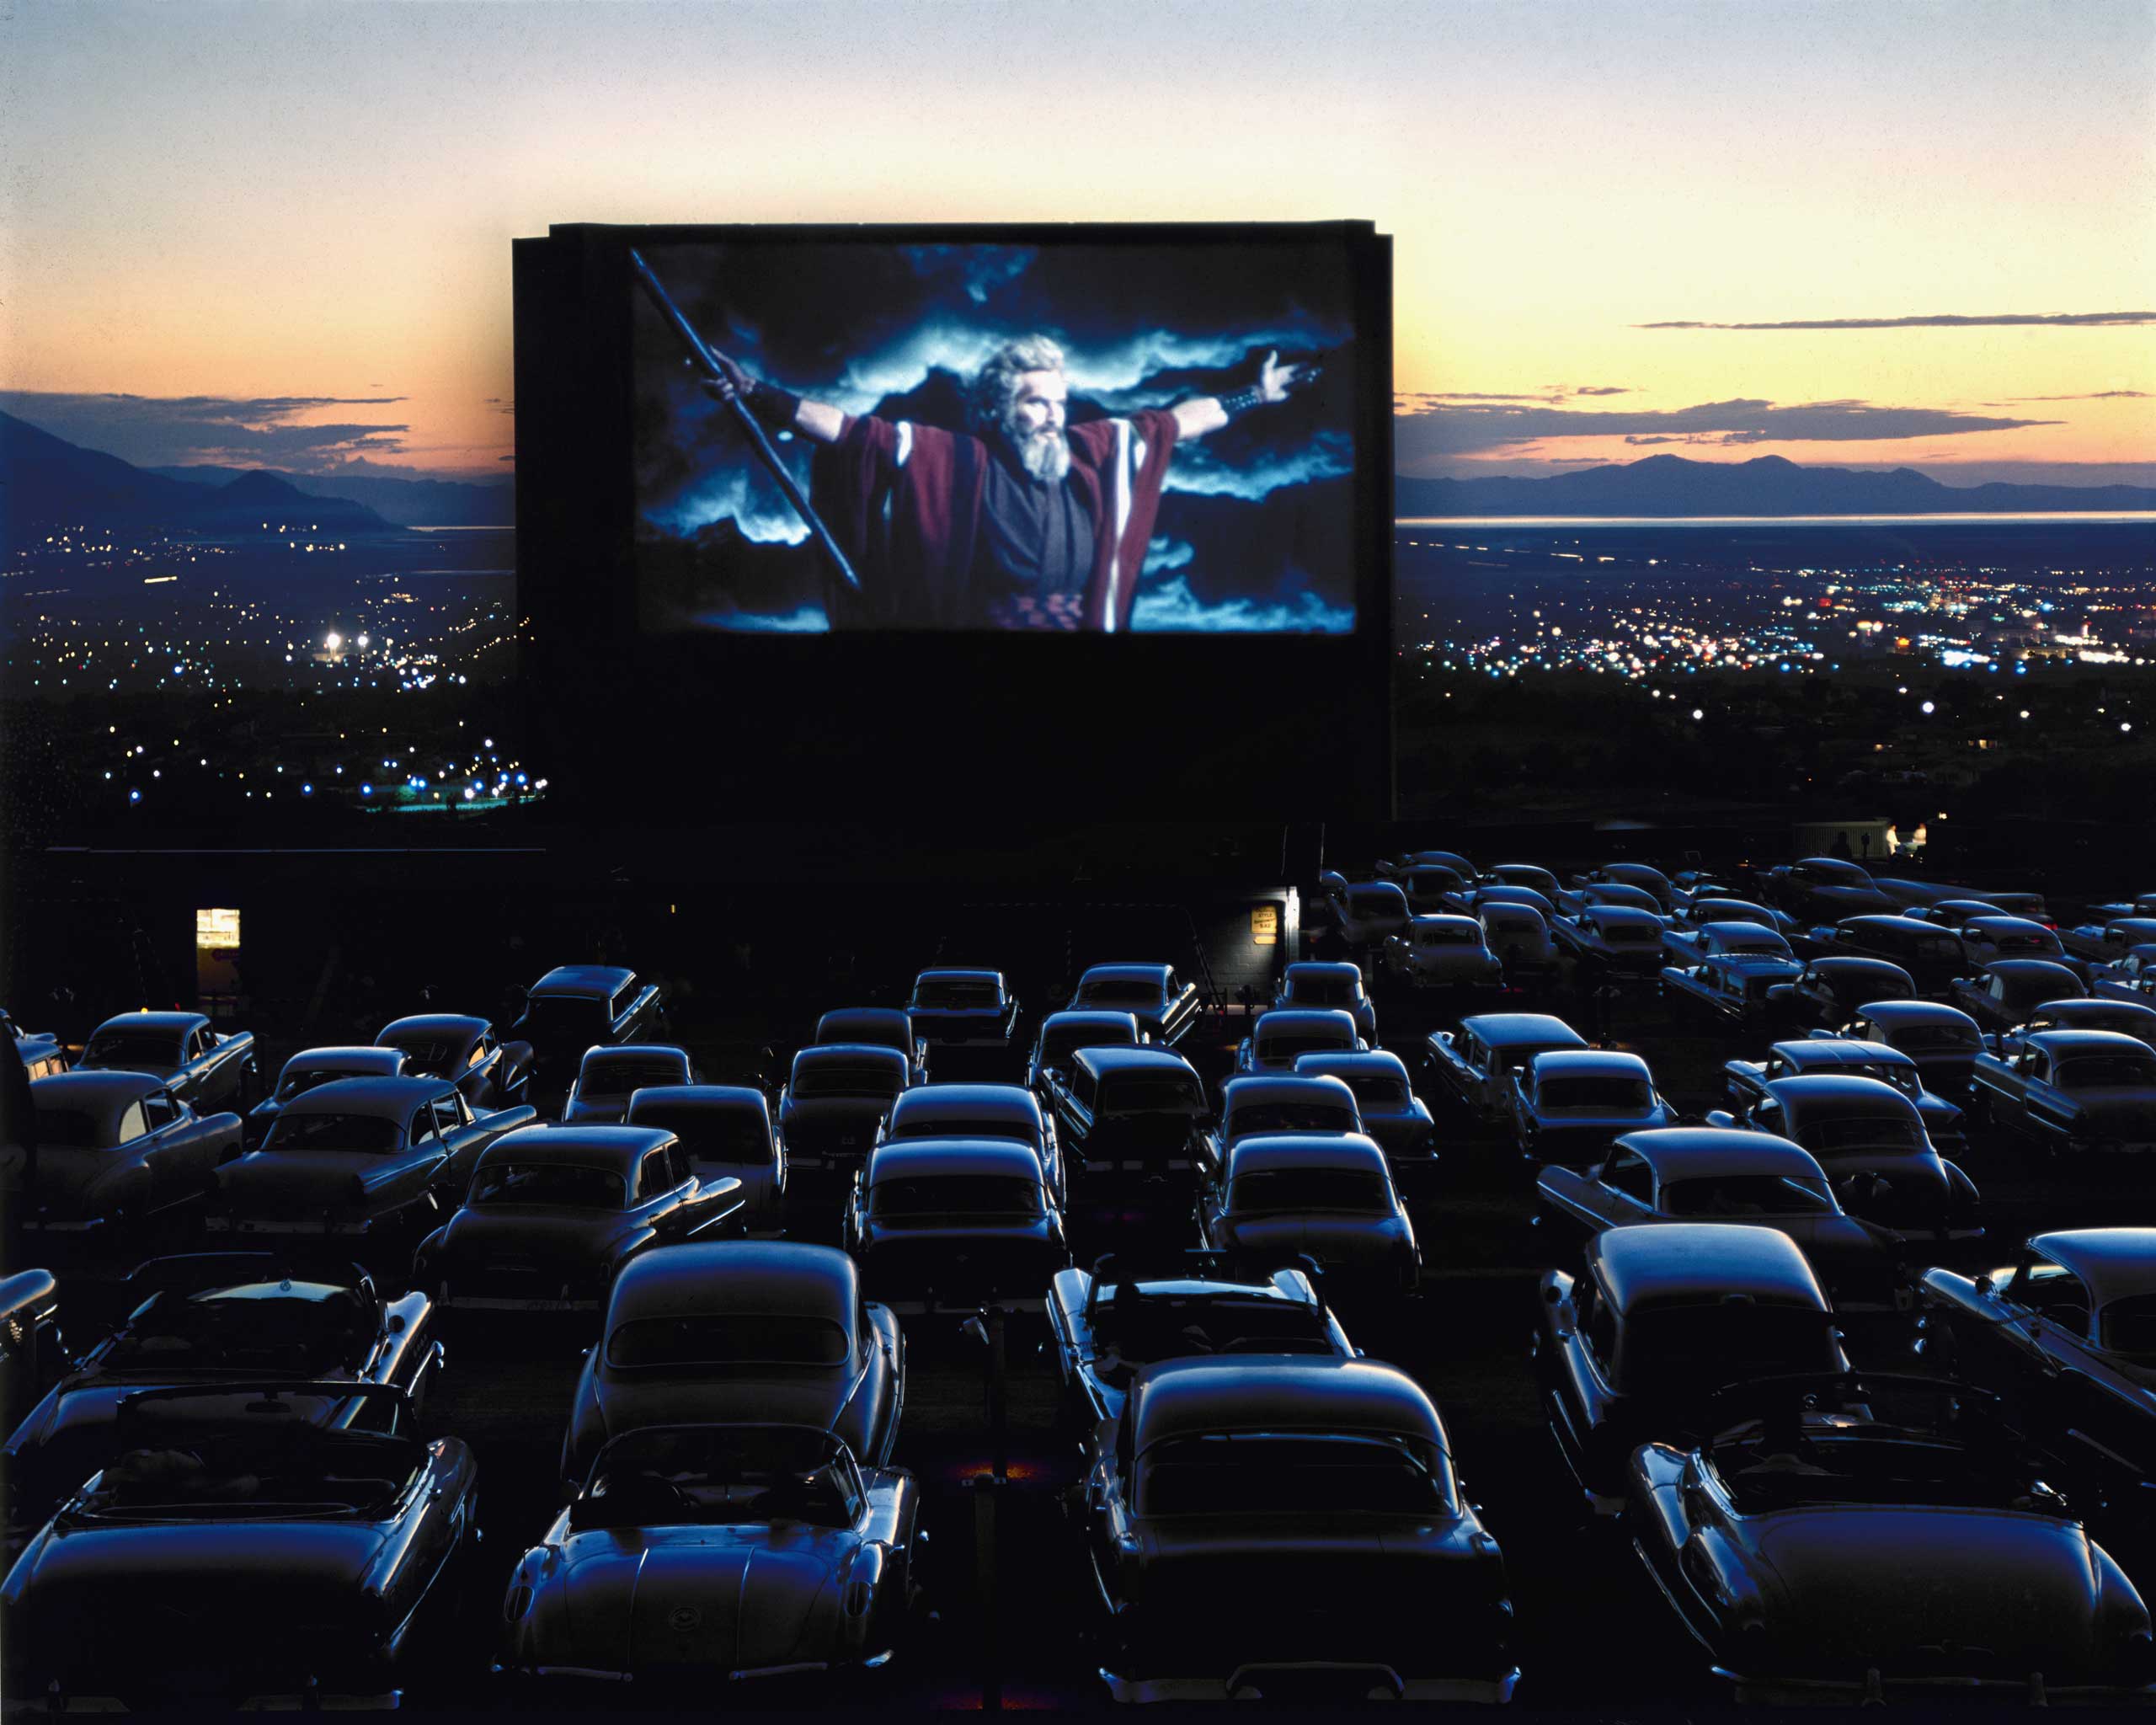 1958 | On the screen of a drive-in theater in Utah, Charlton Heston, as Moses in the The Ten Commandments, throws his arms wide before what appears to be a congregation of cars at prayer. Originally published in the December 22, 1958, issue of LIFE.